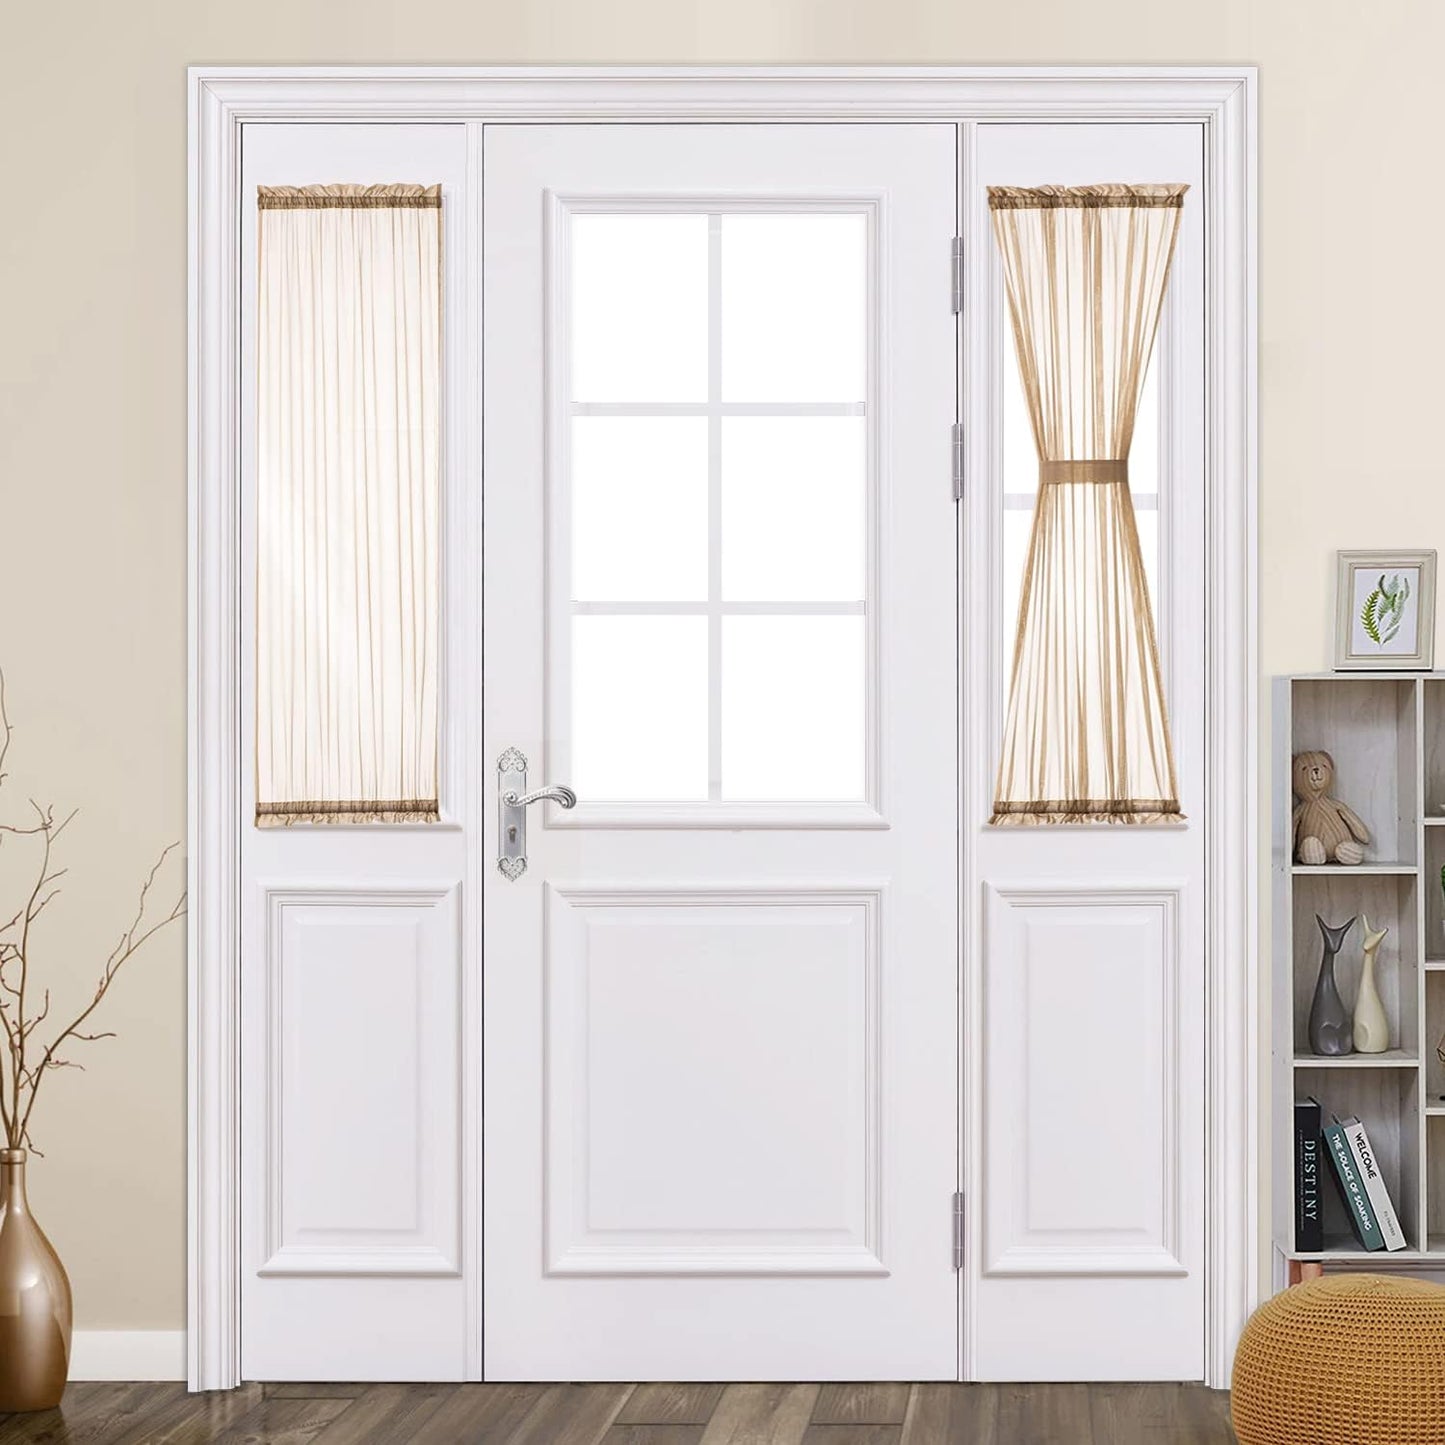 MIULEE French Door Sheer Curtains for Front Back Patio Glass Door Light Filtering Window Treatment with 2 Tiebacks 54 Wide and 72 Inches Length, White, Set of 2  MIULEE Brown 25"W X 40"L 